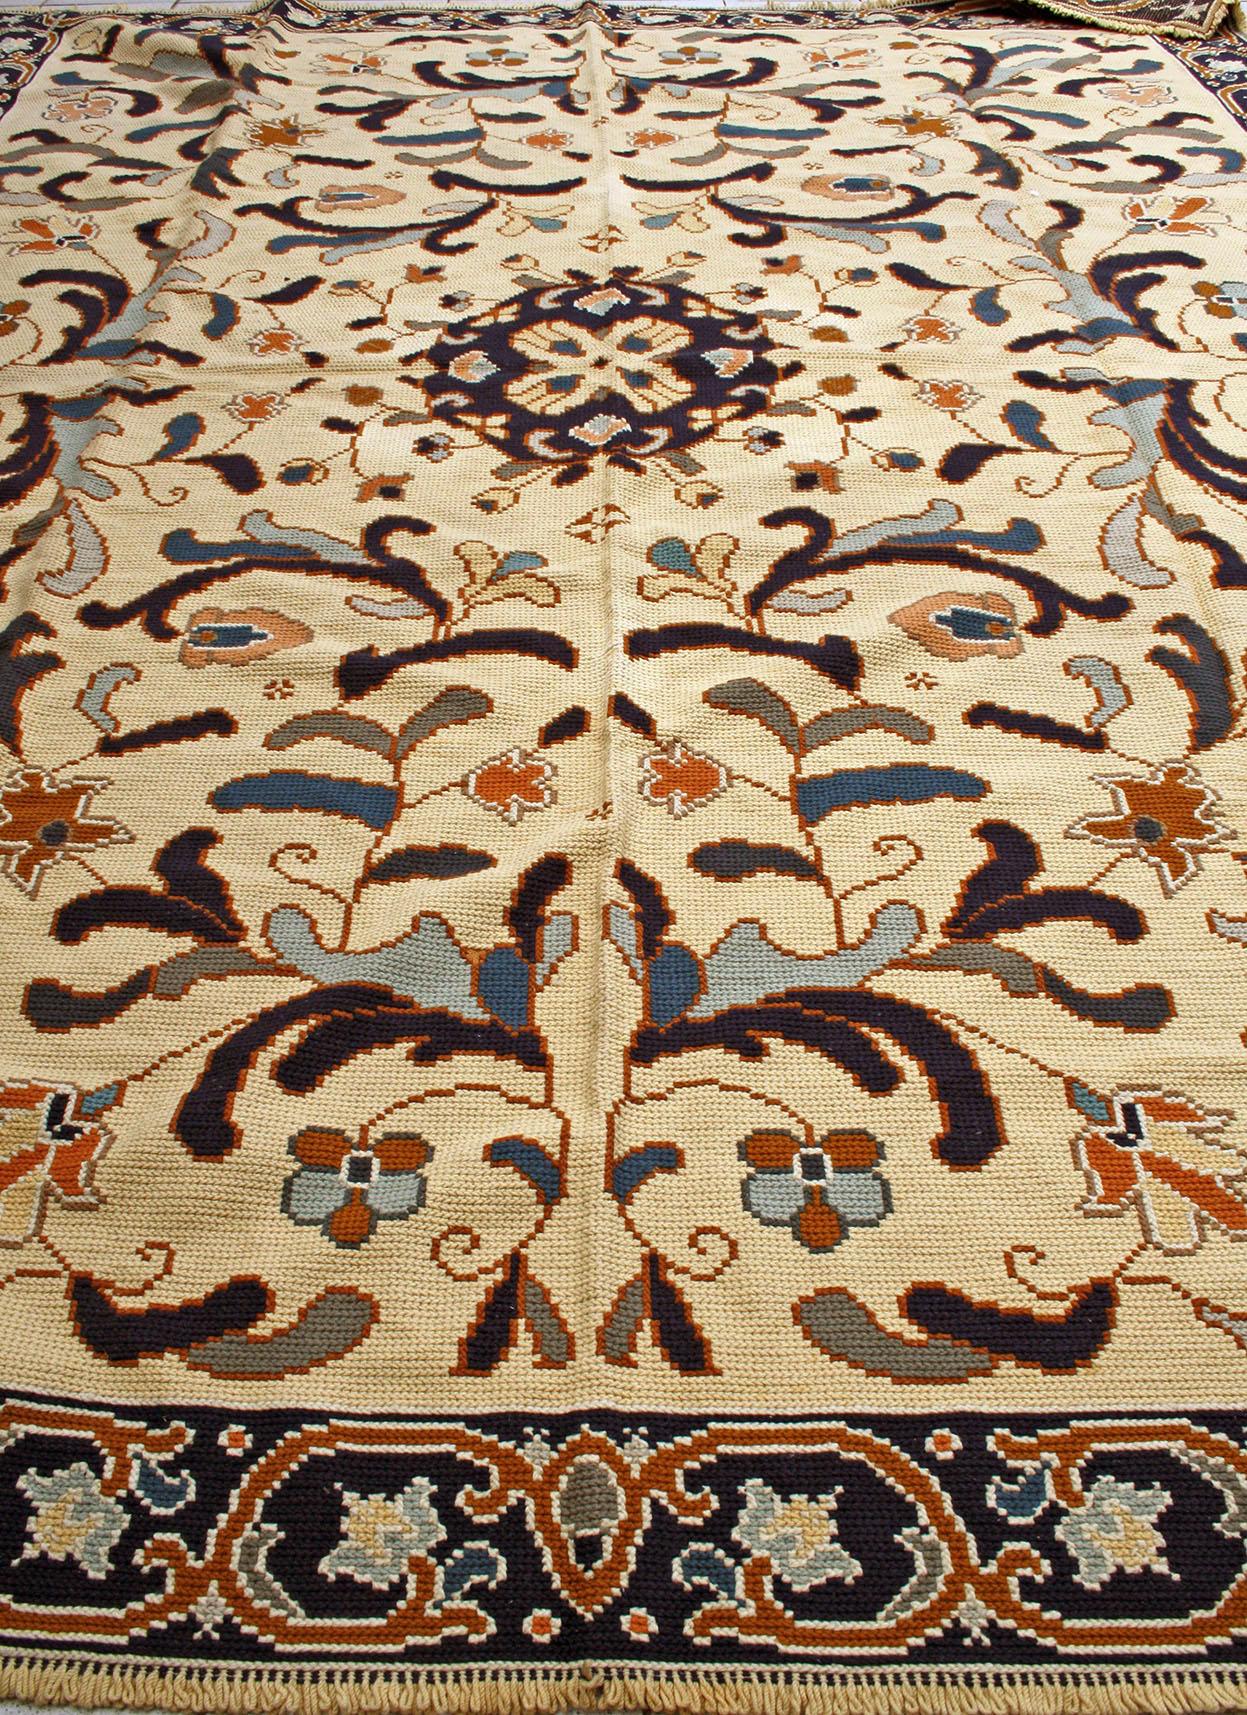 20th Century XL Floral European Portuguese Needlepoint Embroidered Arraiolos Rug Cream & Blue For Sale